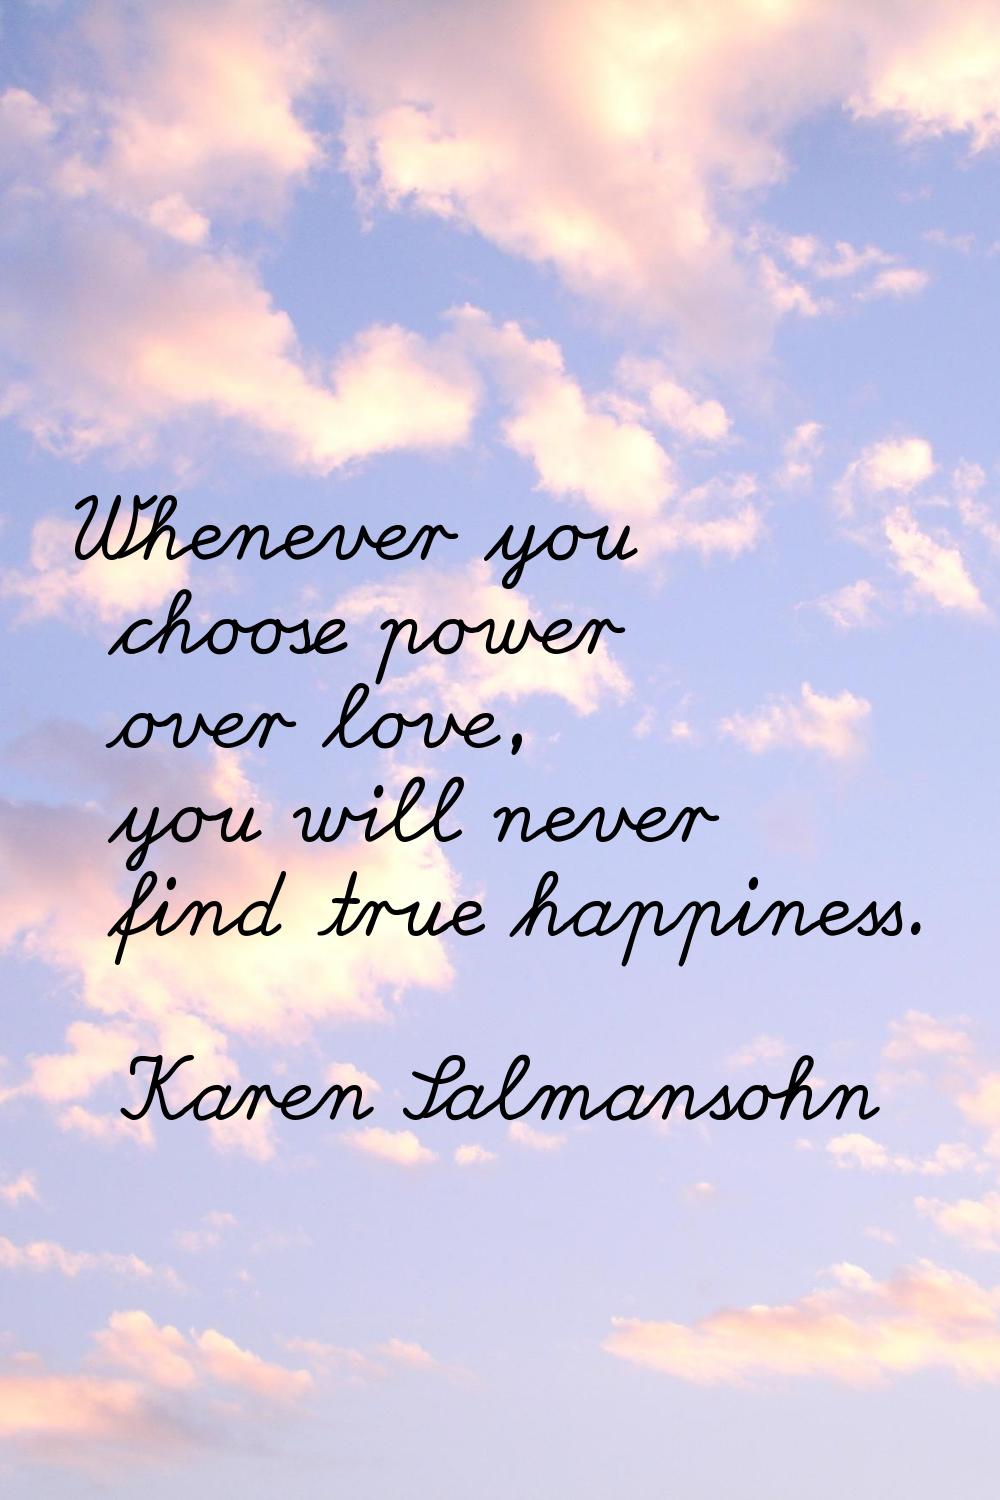 Whenever you choose power over love, you will never find true happiness.